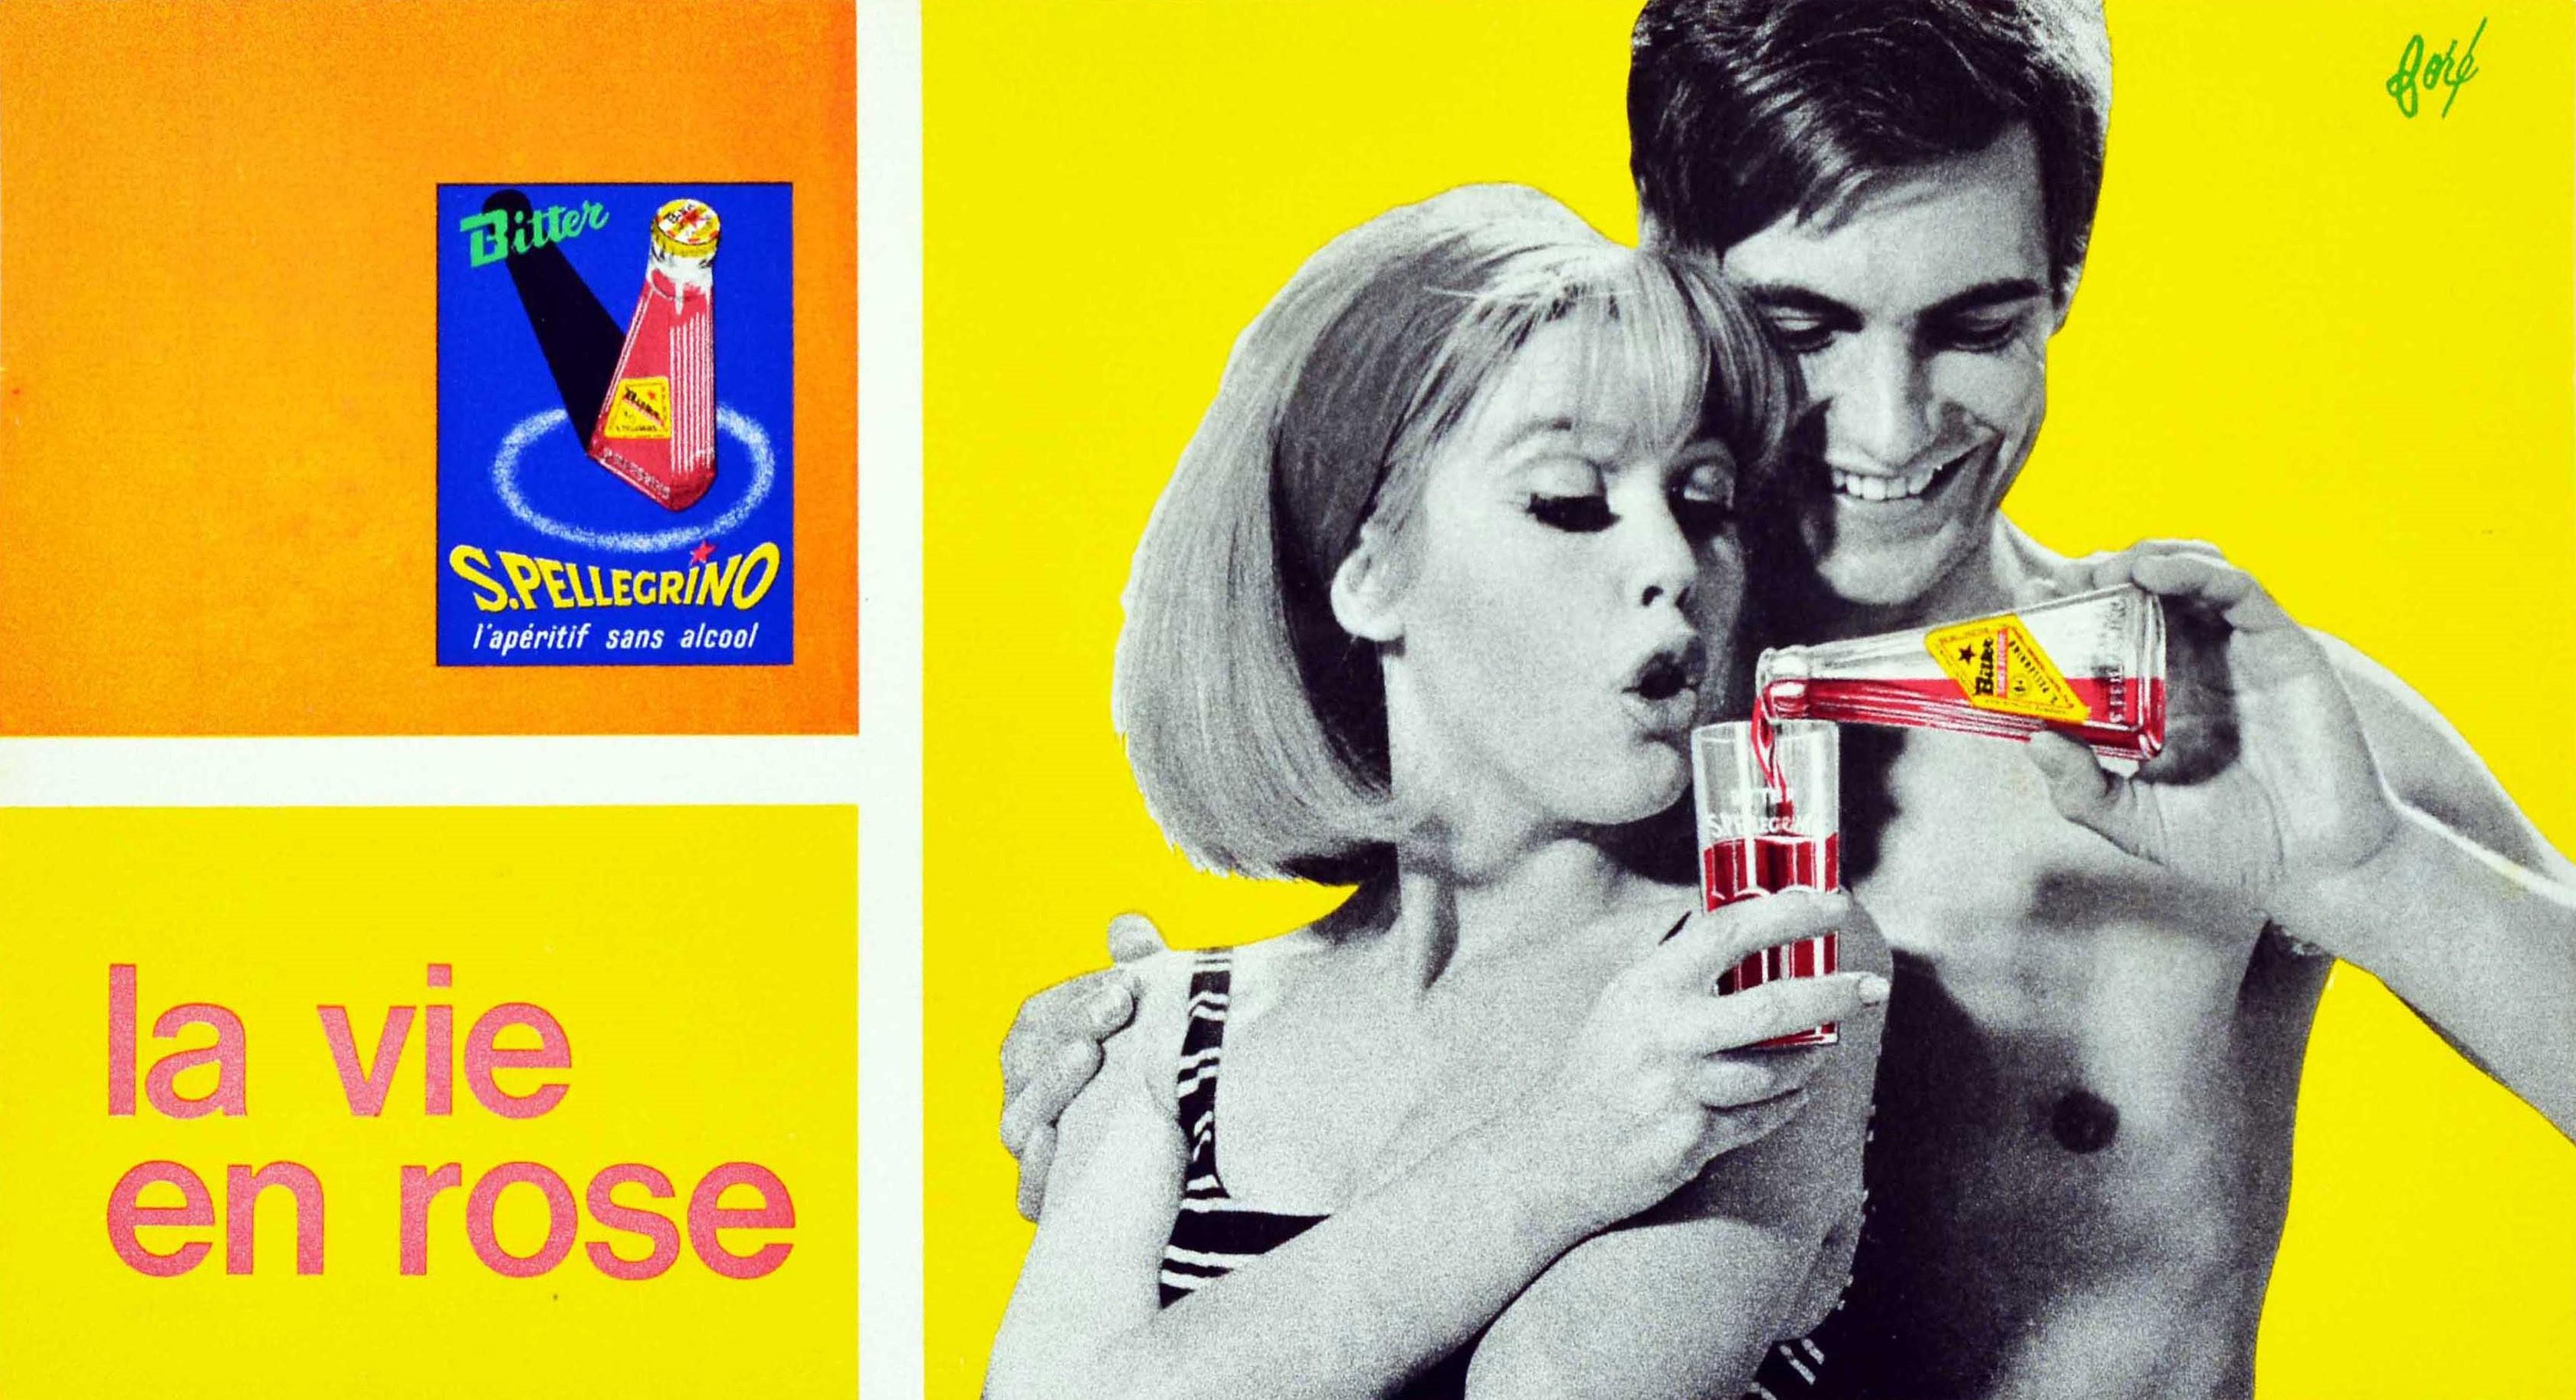 Original vintage drink advertising poster for San Pellegrino non-alcoholic Bitter aperitif - living life in rose tinted glasses without dullness / la vie en rose sans etre gris - featuring a black and white photo of a smiling couple with the man